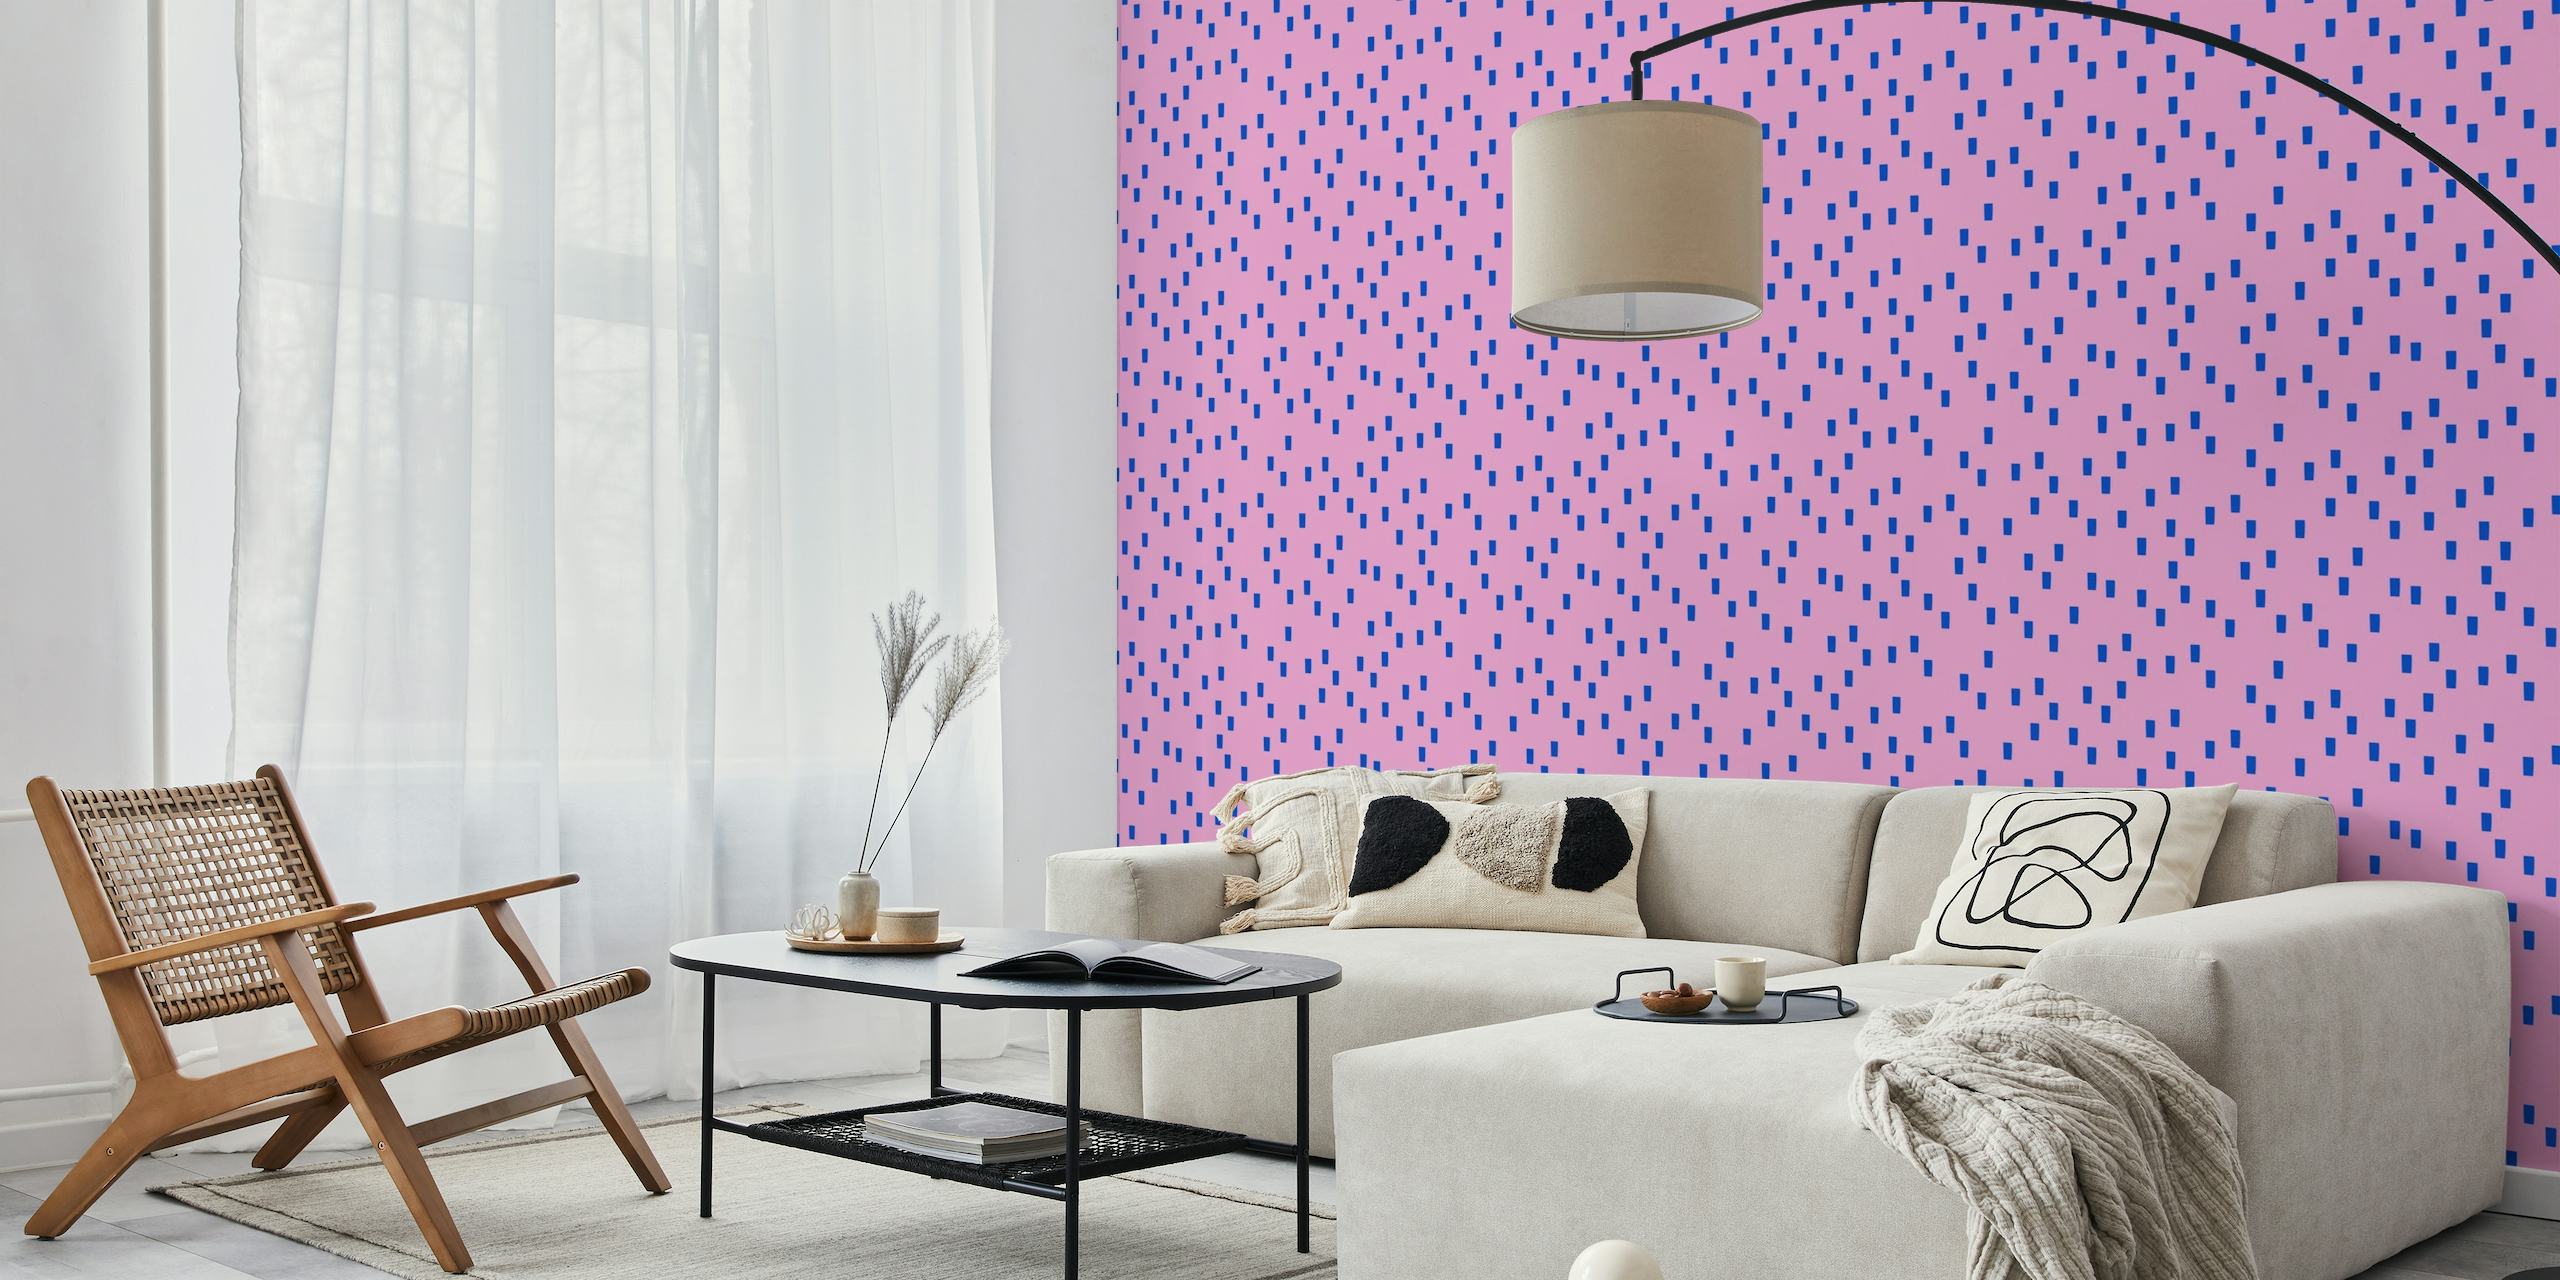 Simple cut outs blue on pink wallpaper